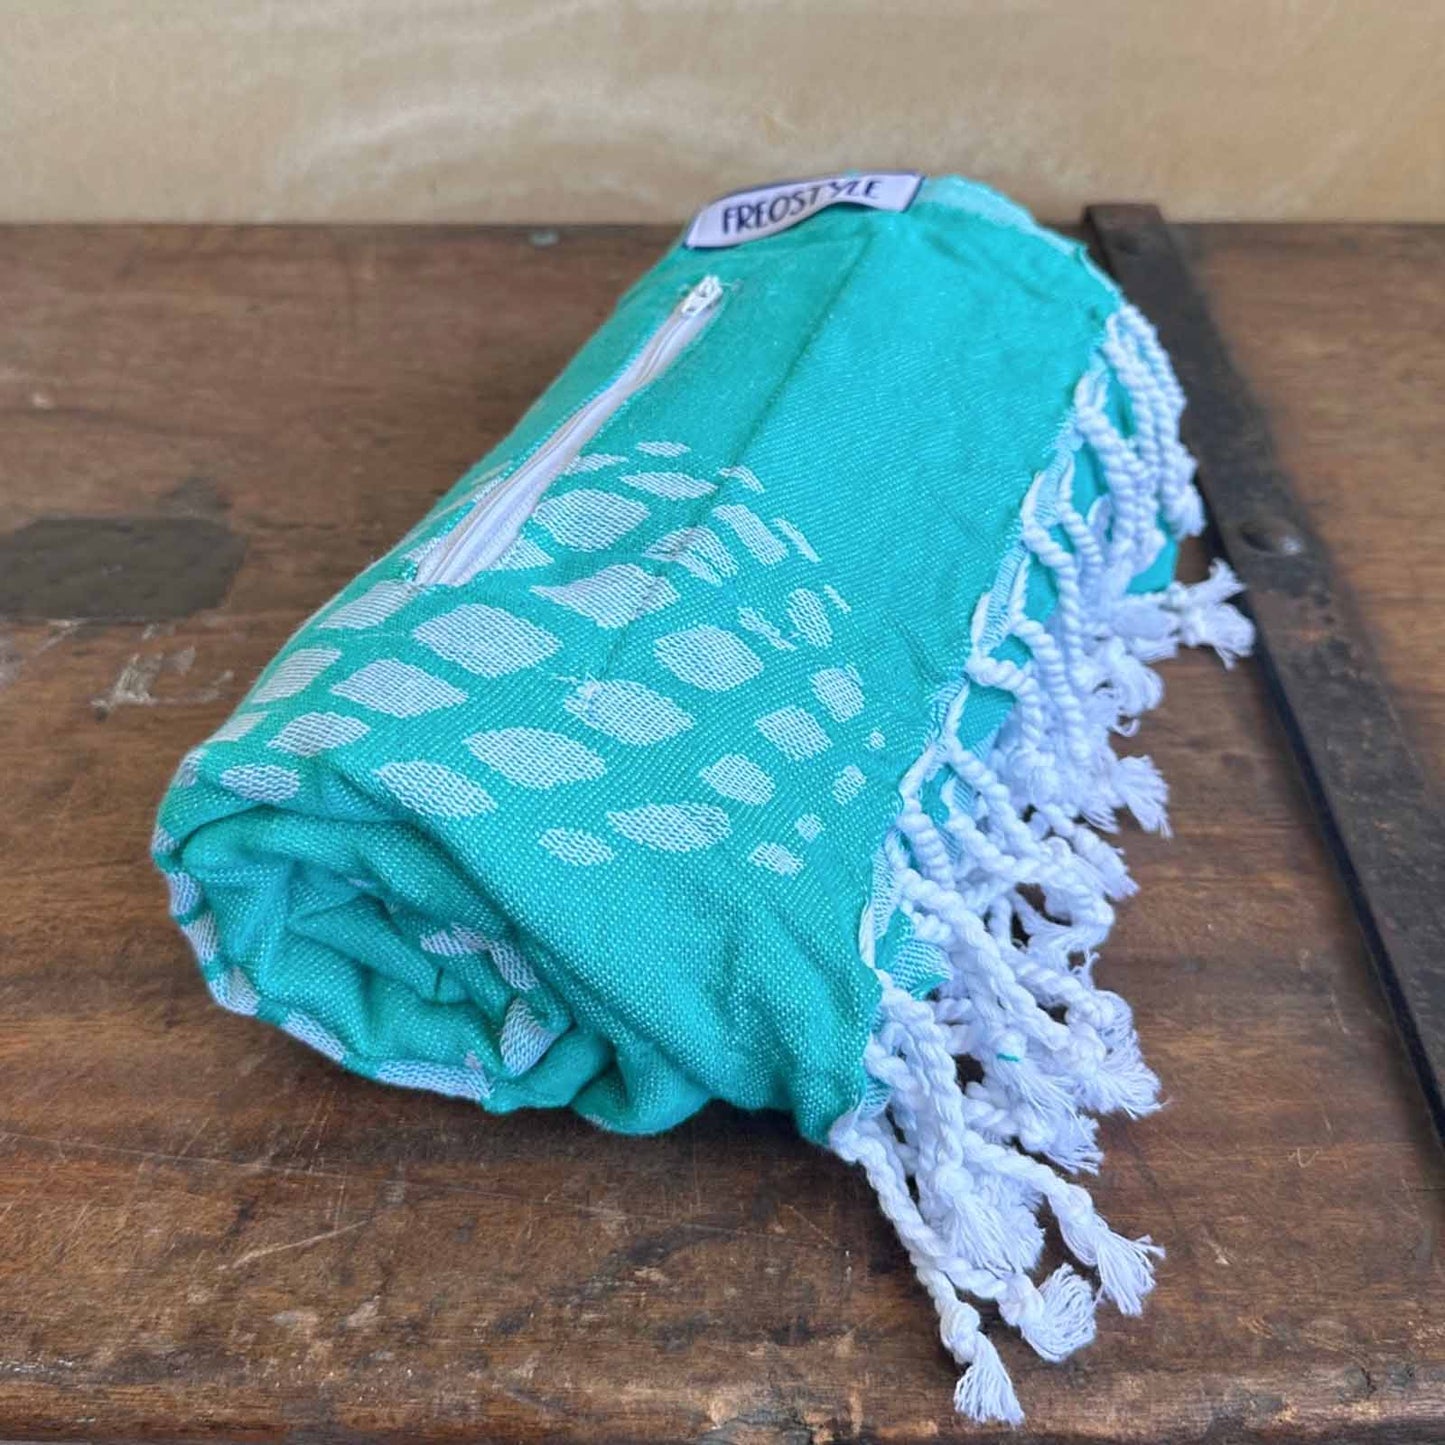 Pineapple Mint Turkish Towel with Pockets by Freostyle, rolled